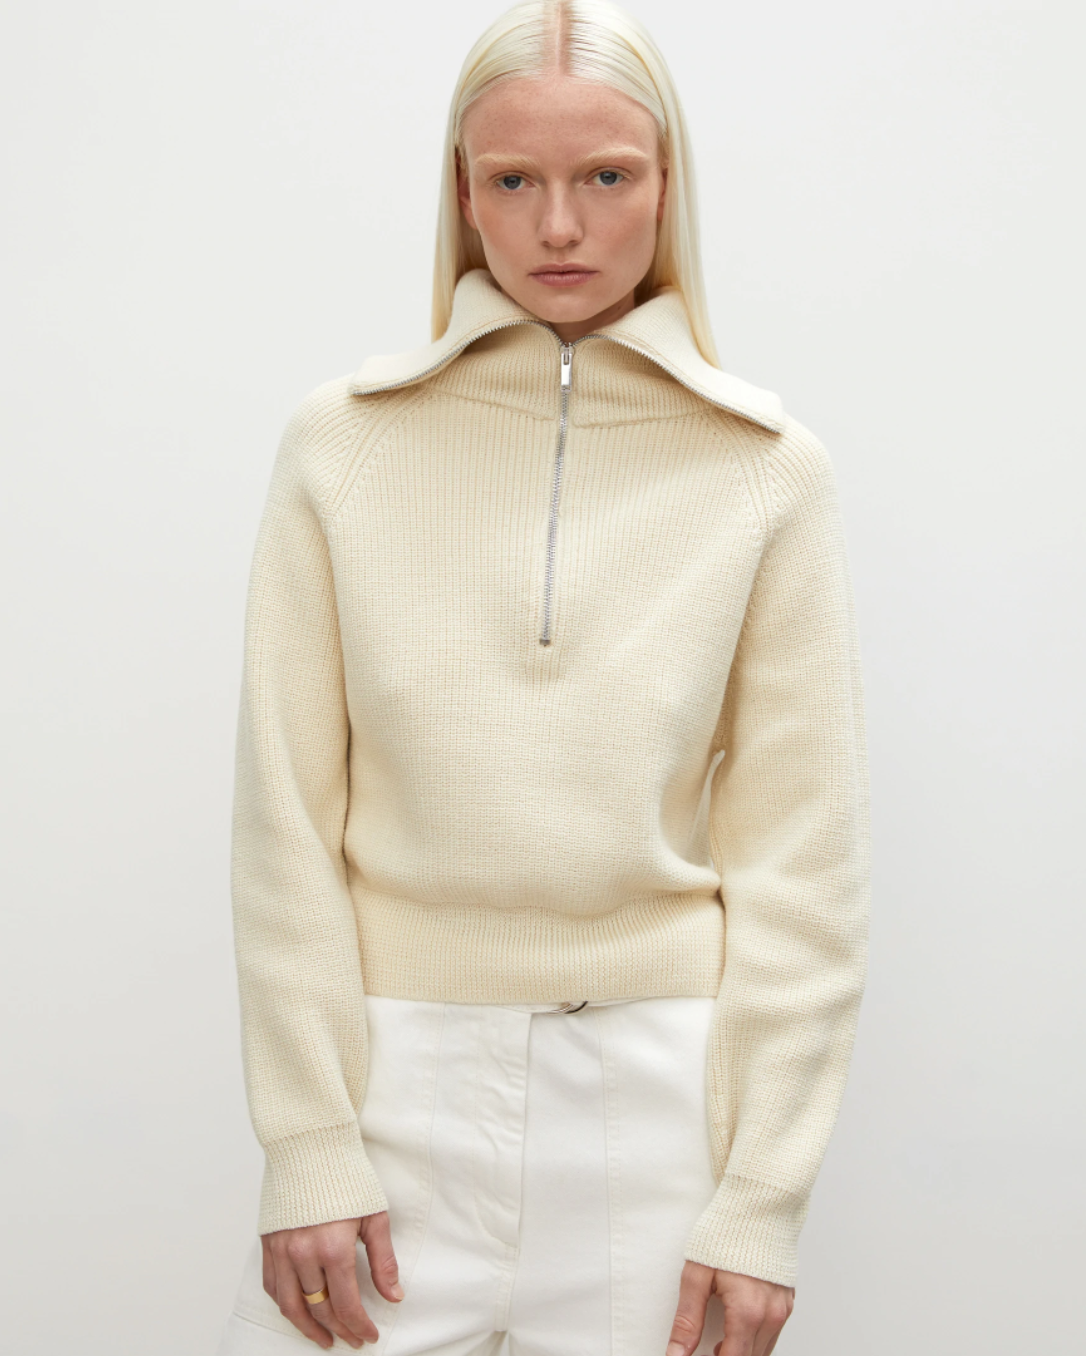 Carry Pullover in off white by Róhe Frames